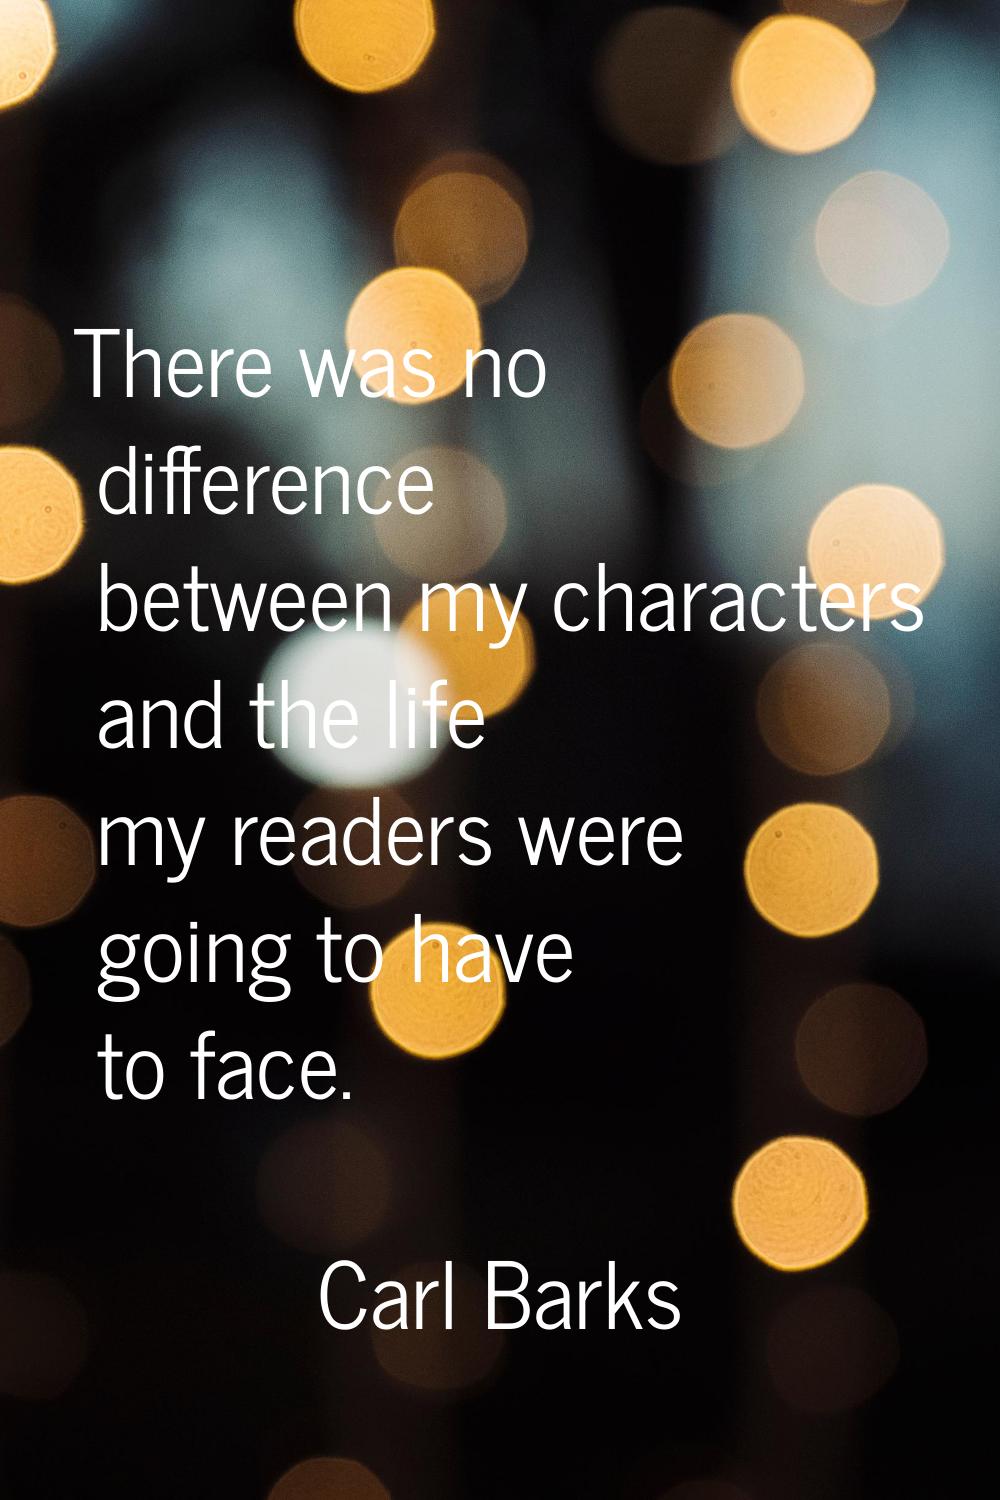 There was no difference between my characters and the life my readers were going to have to face.